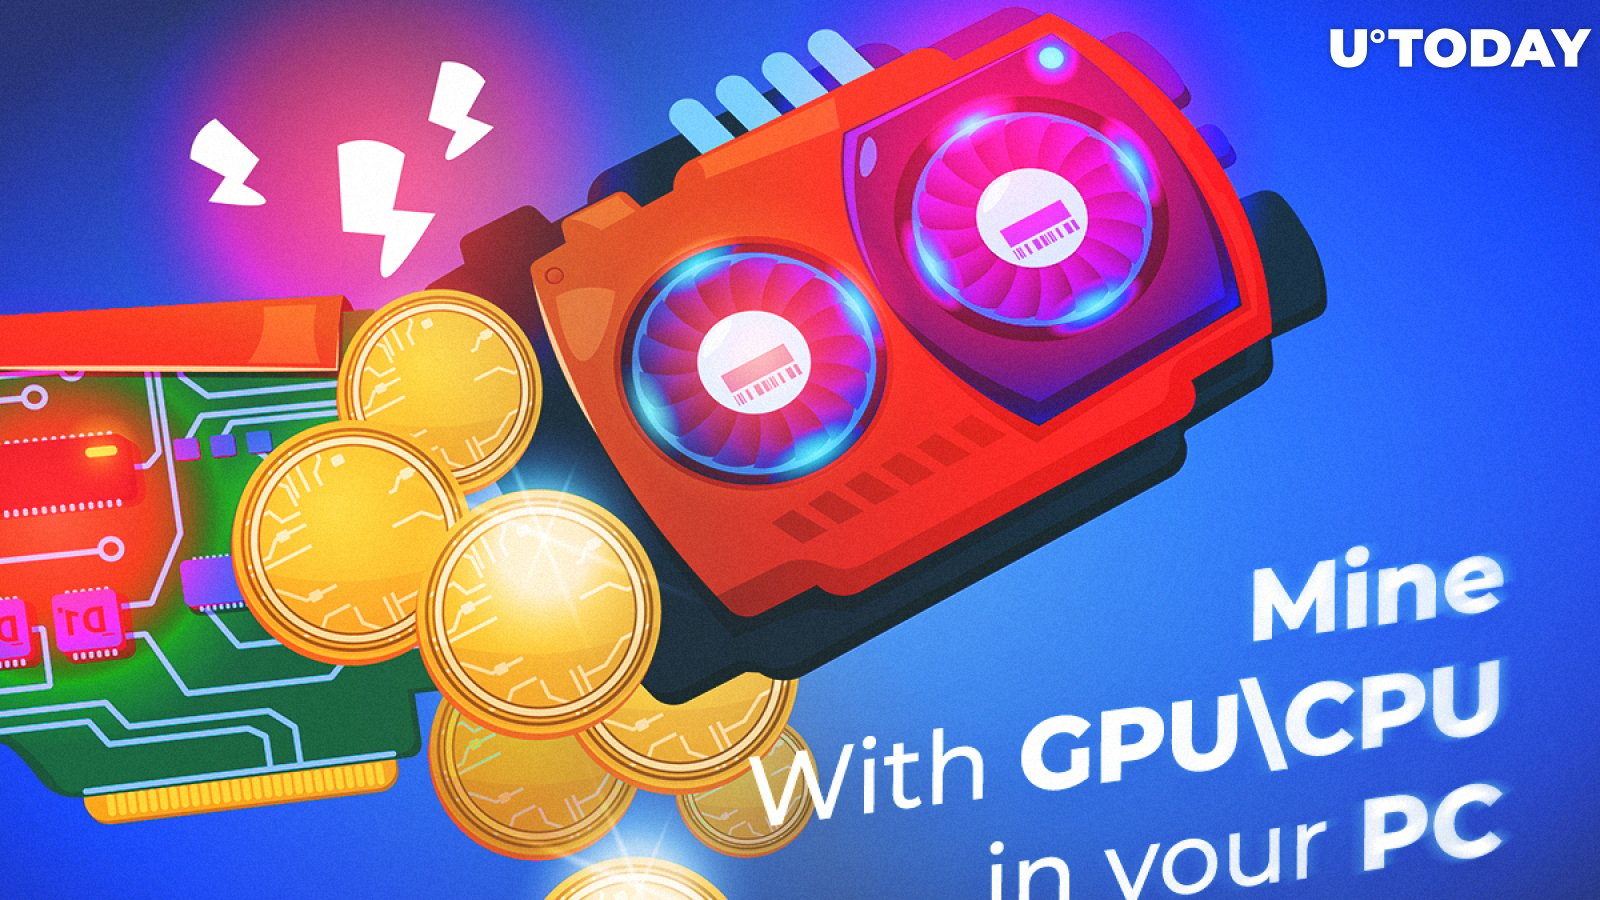 What Cryptocurrency Can You Still Mine With GPU\CPU in your PC in 2018?